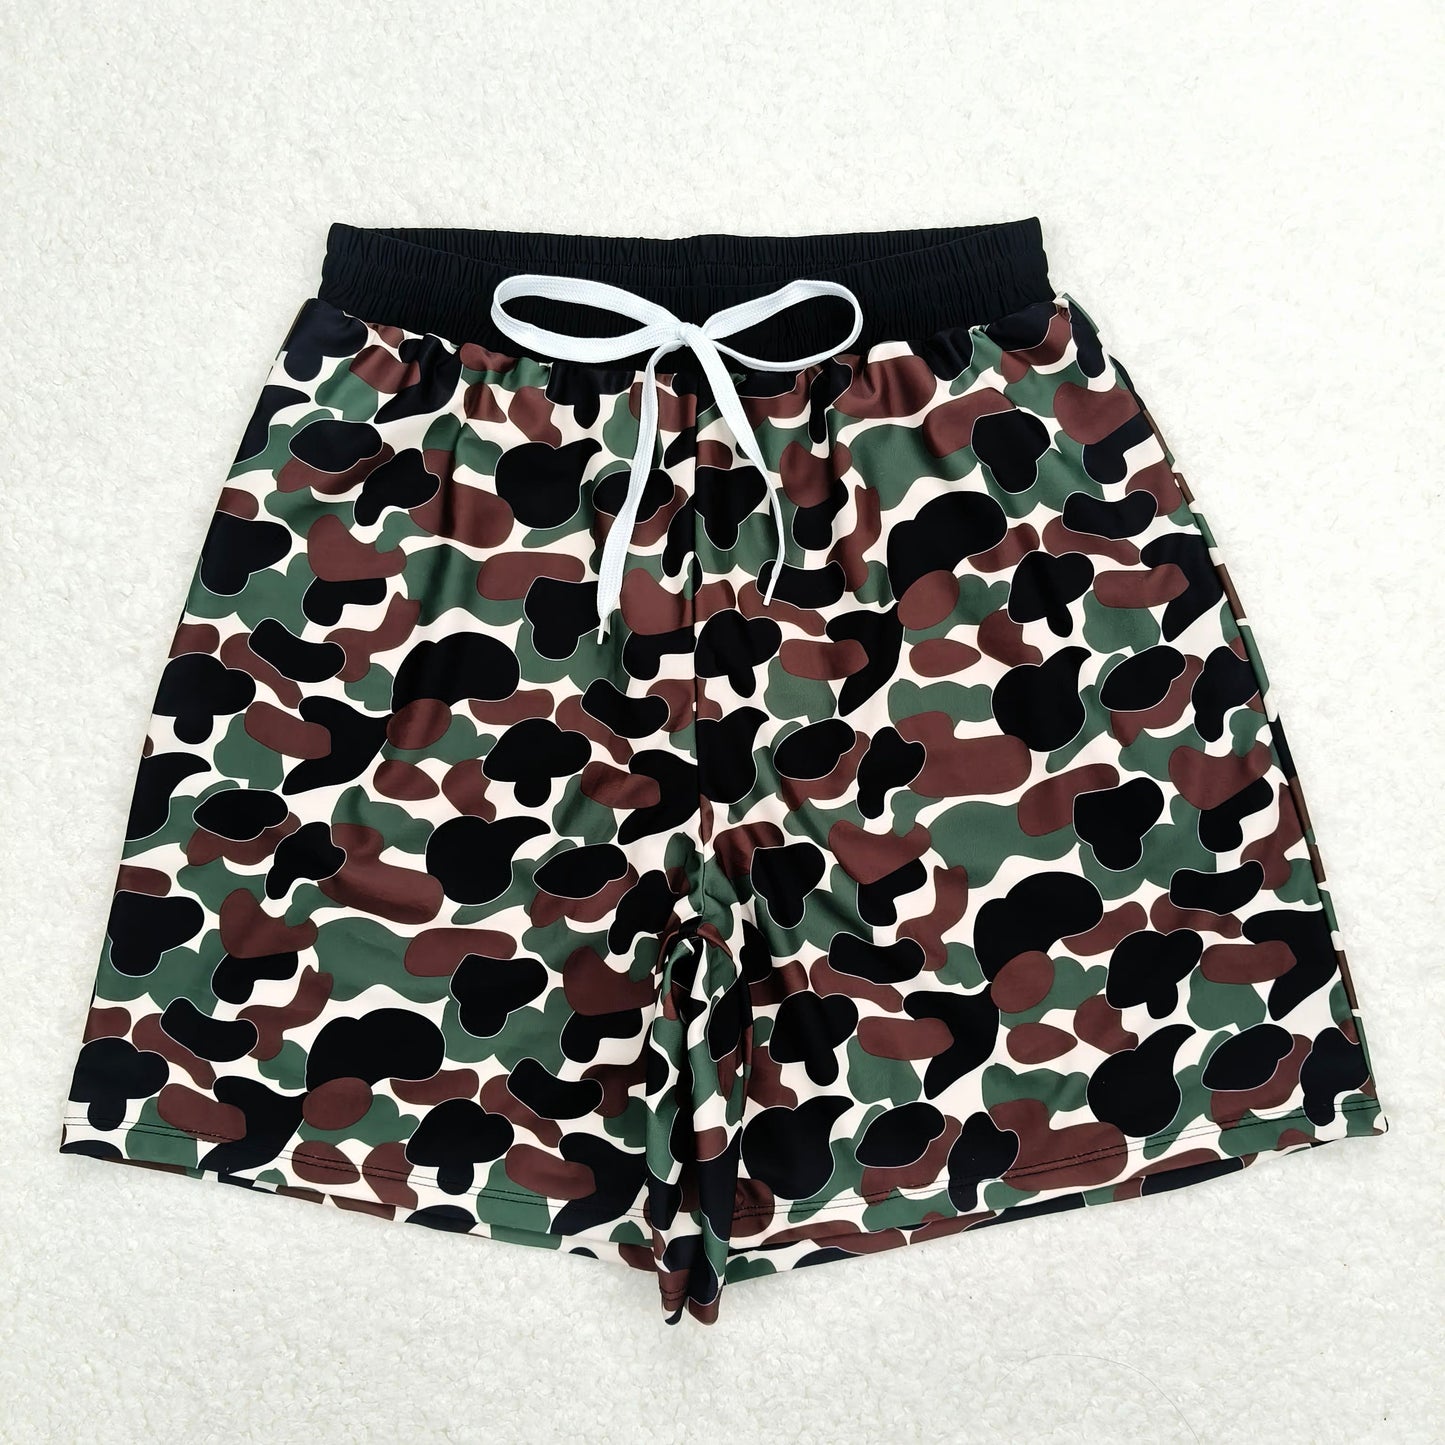 Beige swim trunks with brown and green camouflage